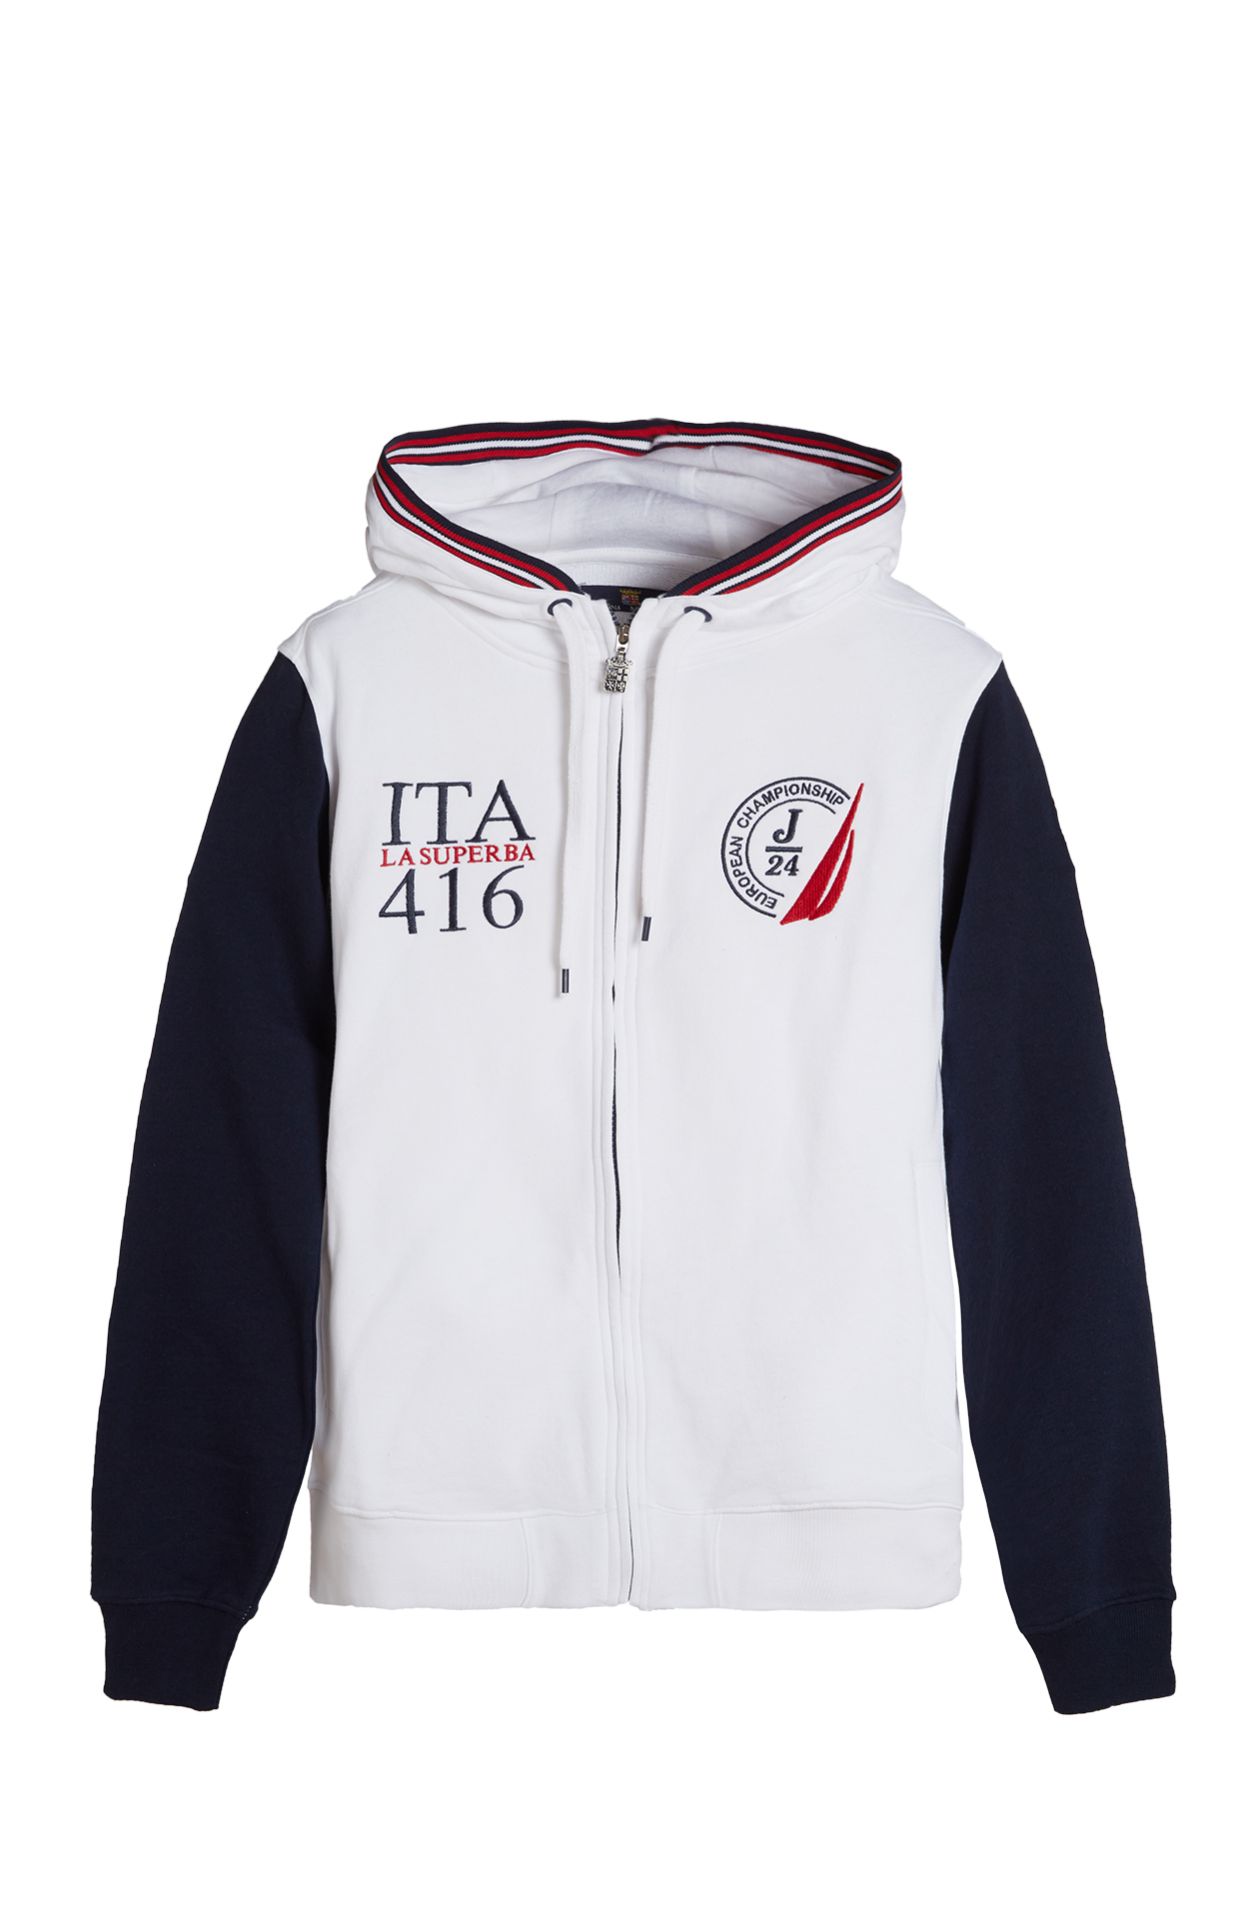 TWO-TONE HOODED SWEATSHIRT IN PURE COTTON FRENCH TERRY